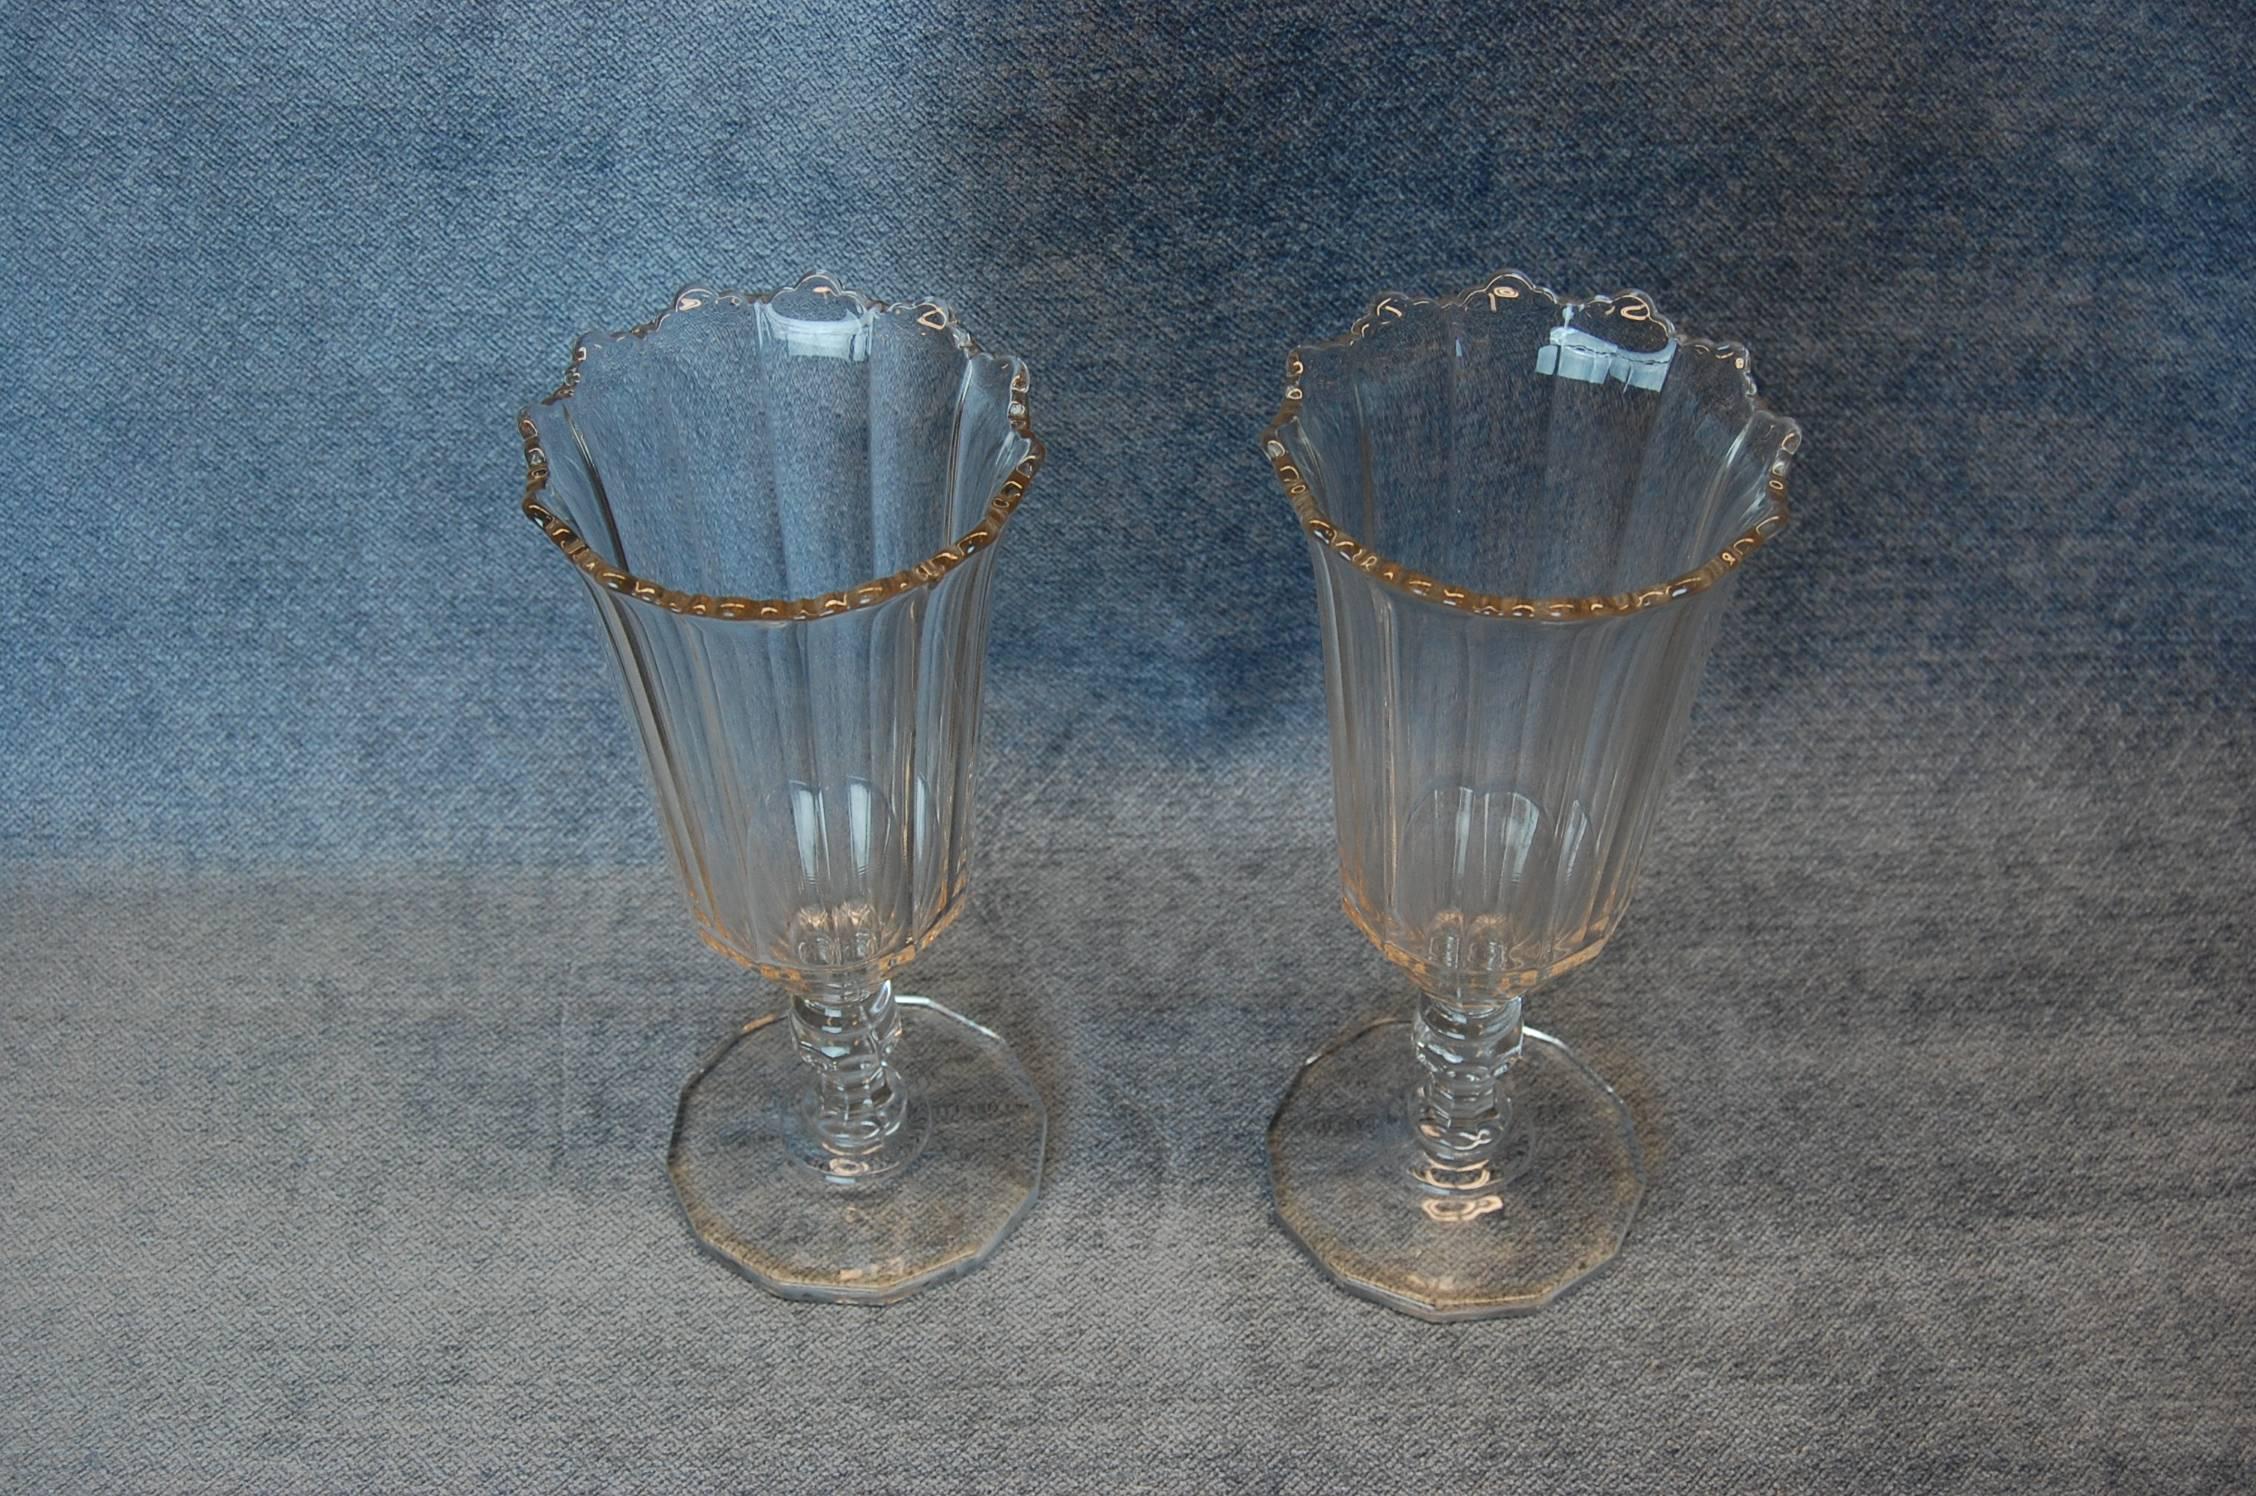 Pressed Pair of American Clear Glass Celery Vases, circa 1880